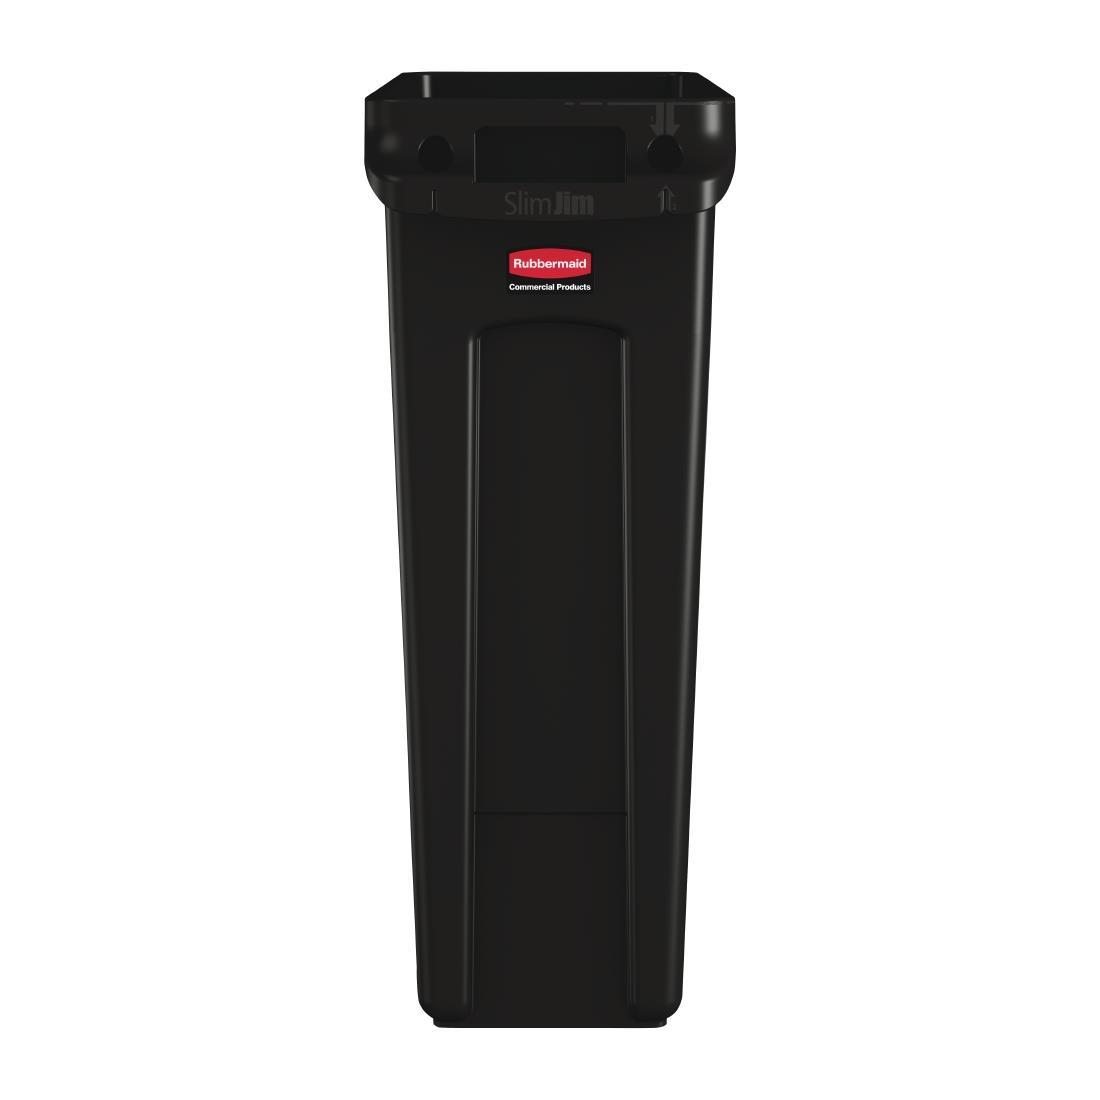 Rubbermaid Slim Jim Container With Venting Channels Black 87Ltr - CP653  - 2